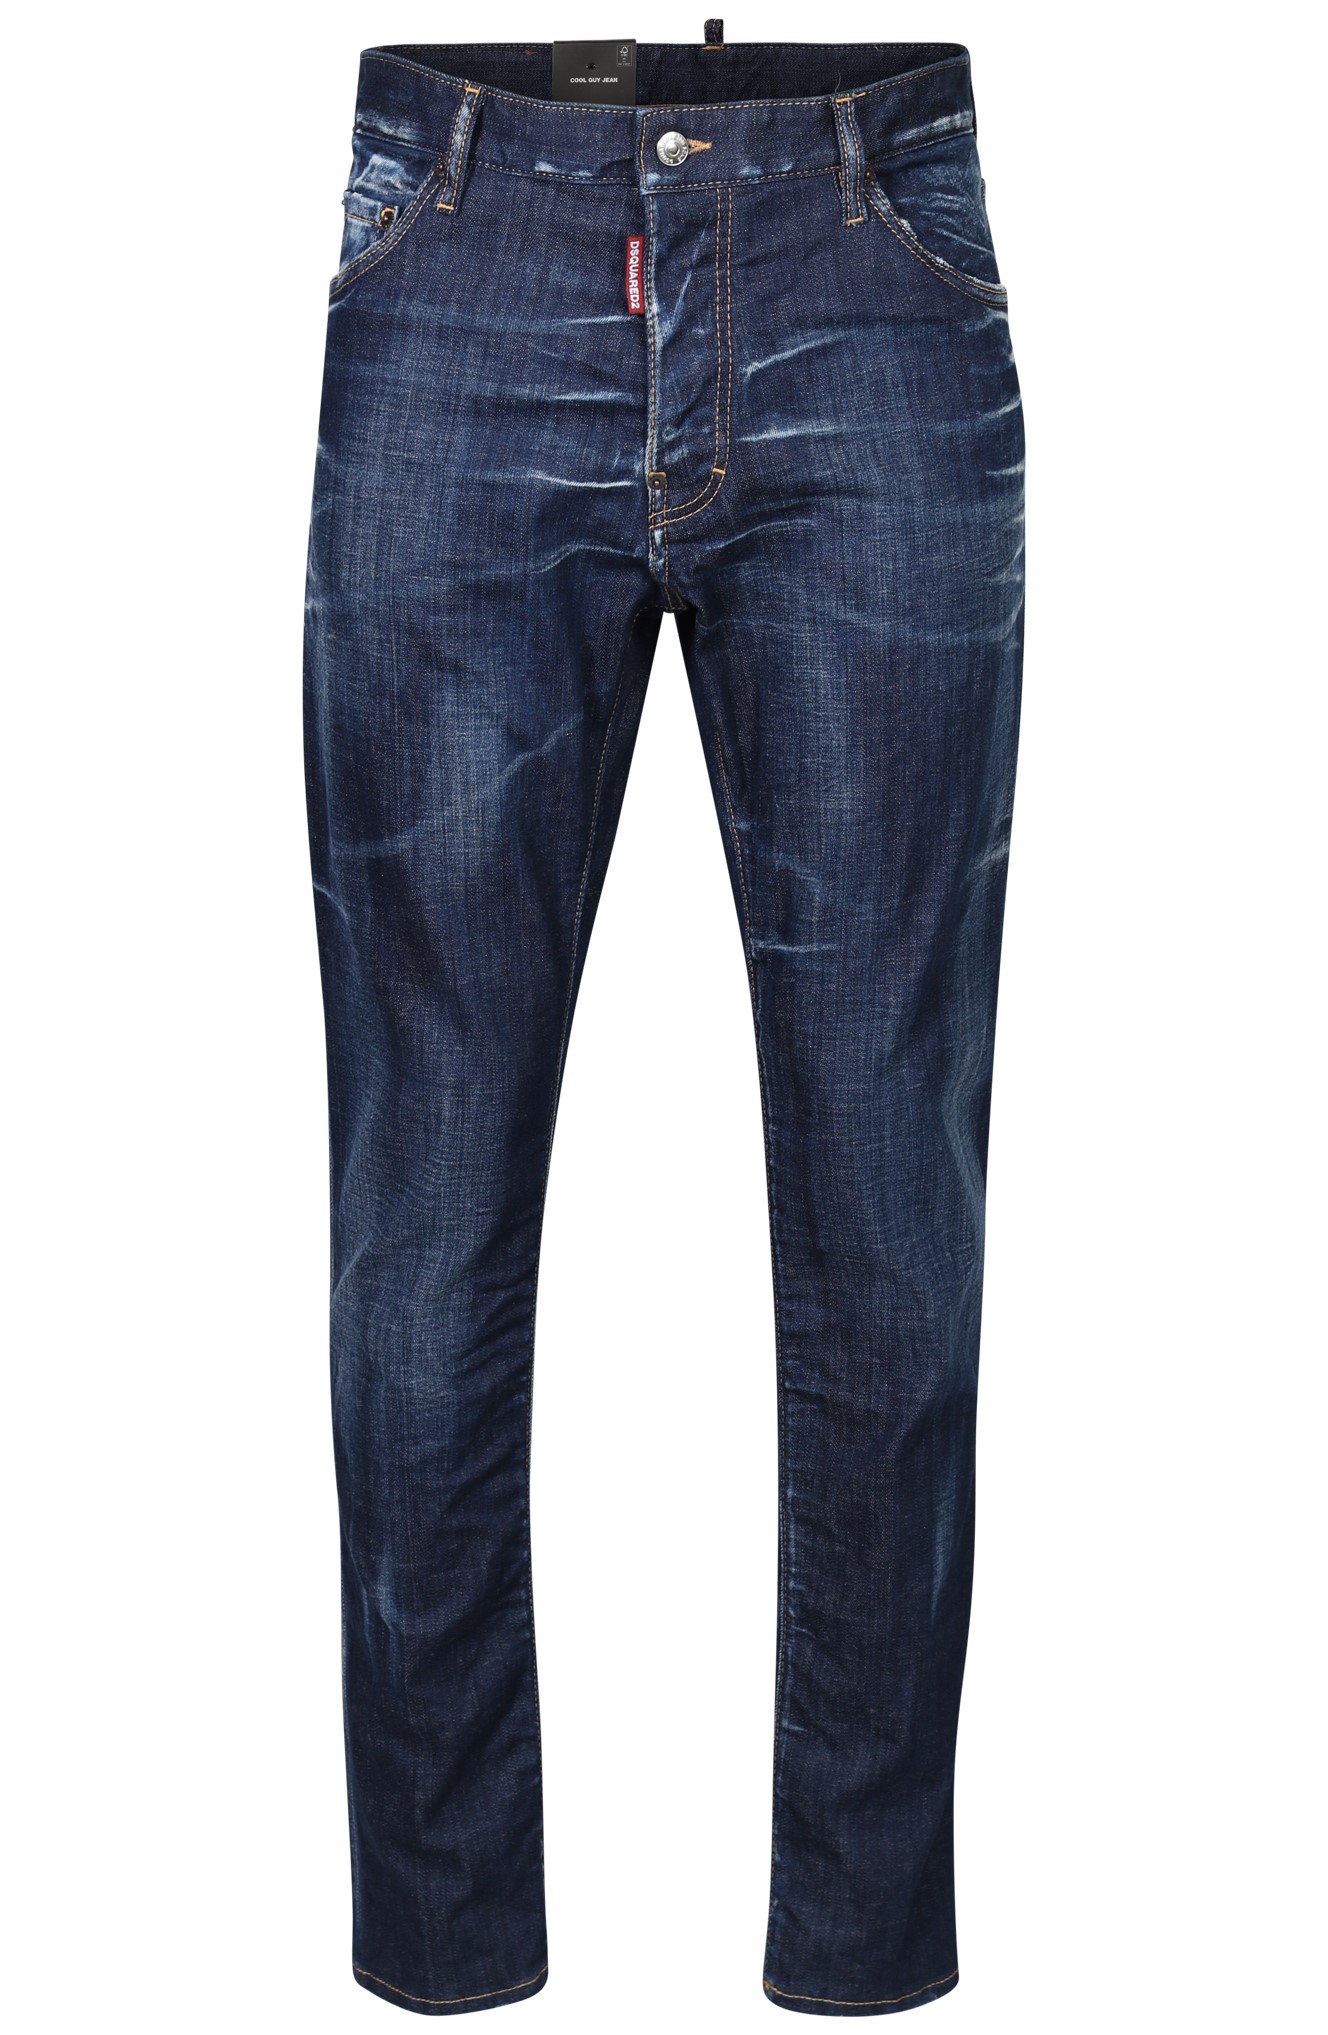 DSQUARED2 Cool Guy Jeans in Washed Dark Blue 54